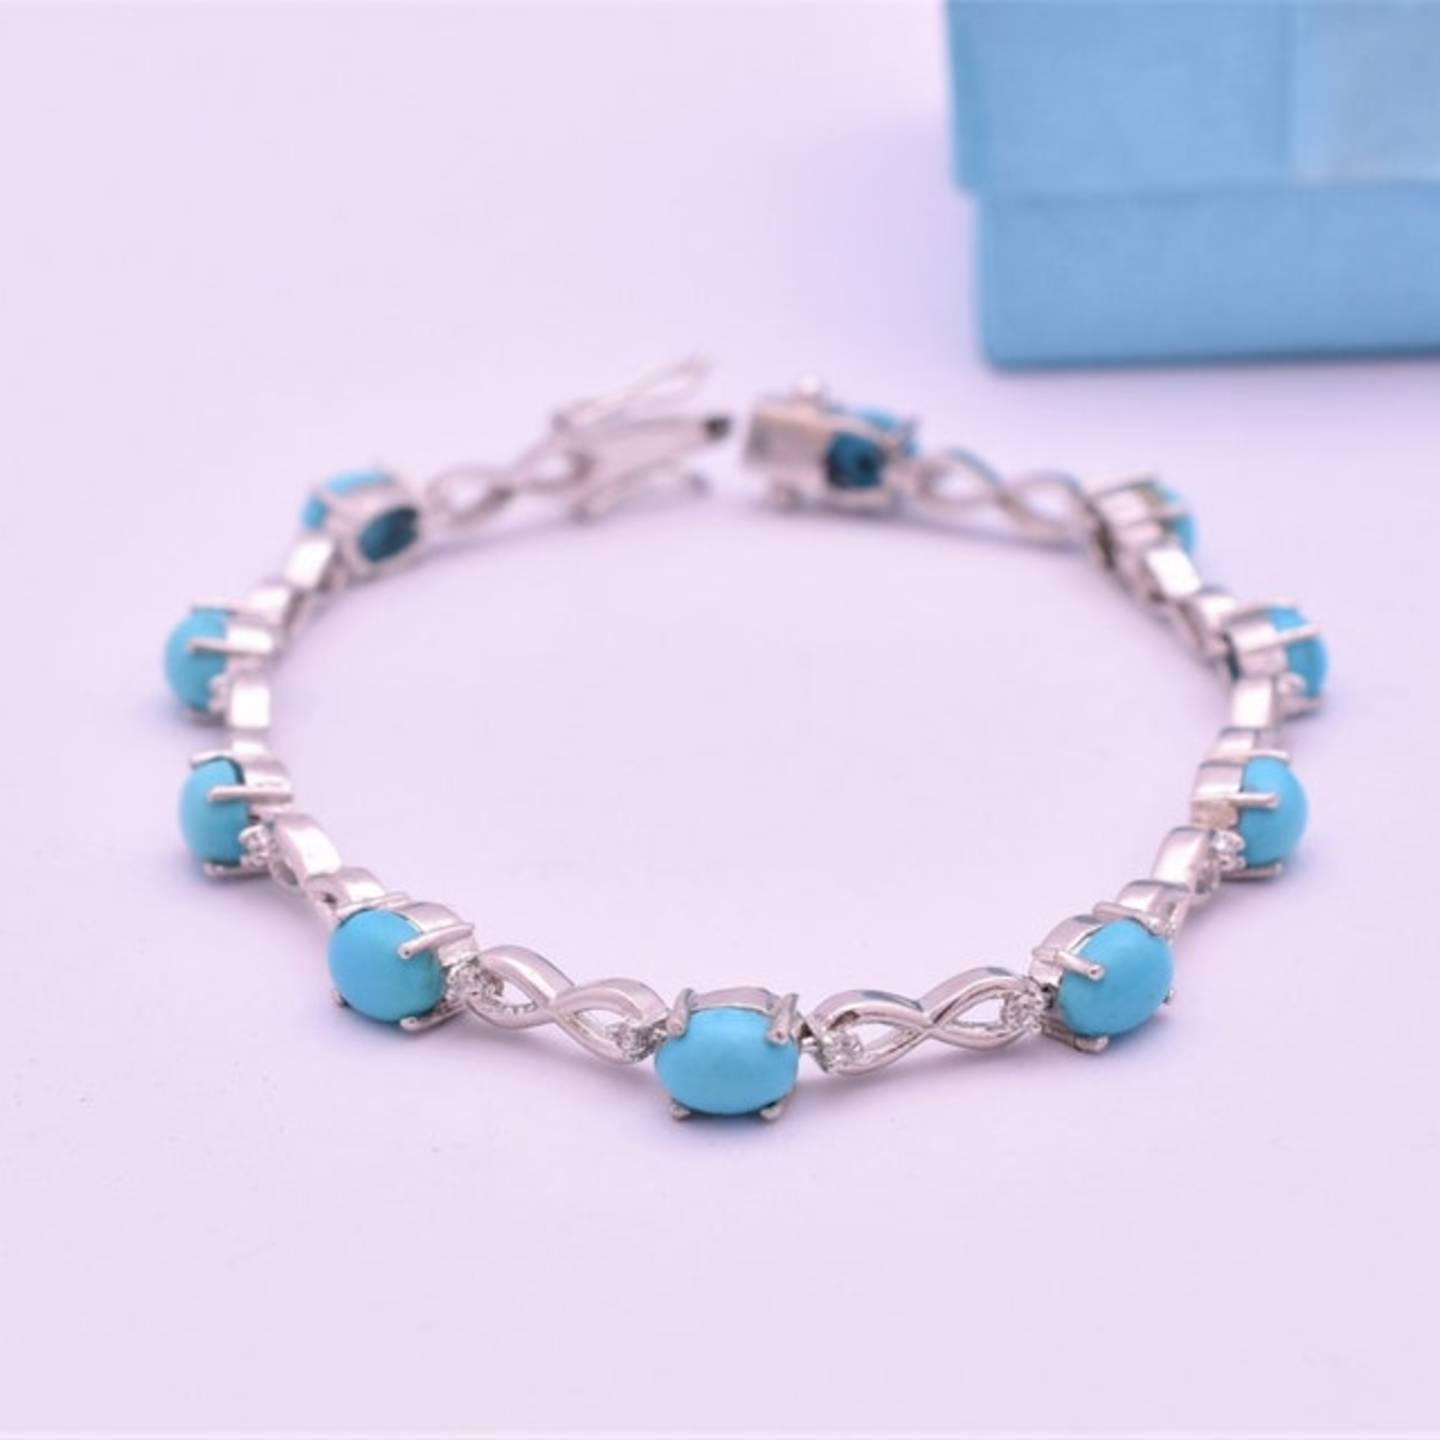 Natural Sleeping Beauty Turquoise Real Gemstone Chain Bracelet - Solid 925 Sterling Silver Bracelet - Length 7.75 Inches